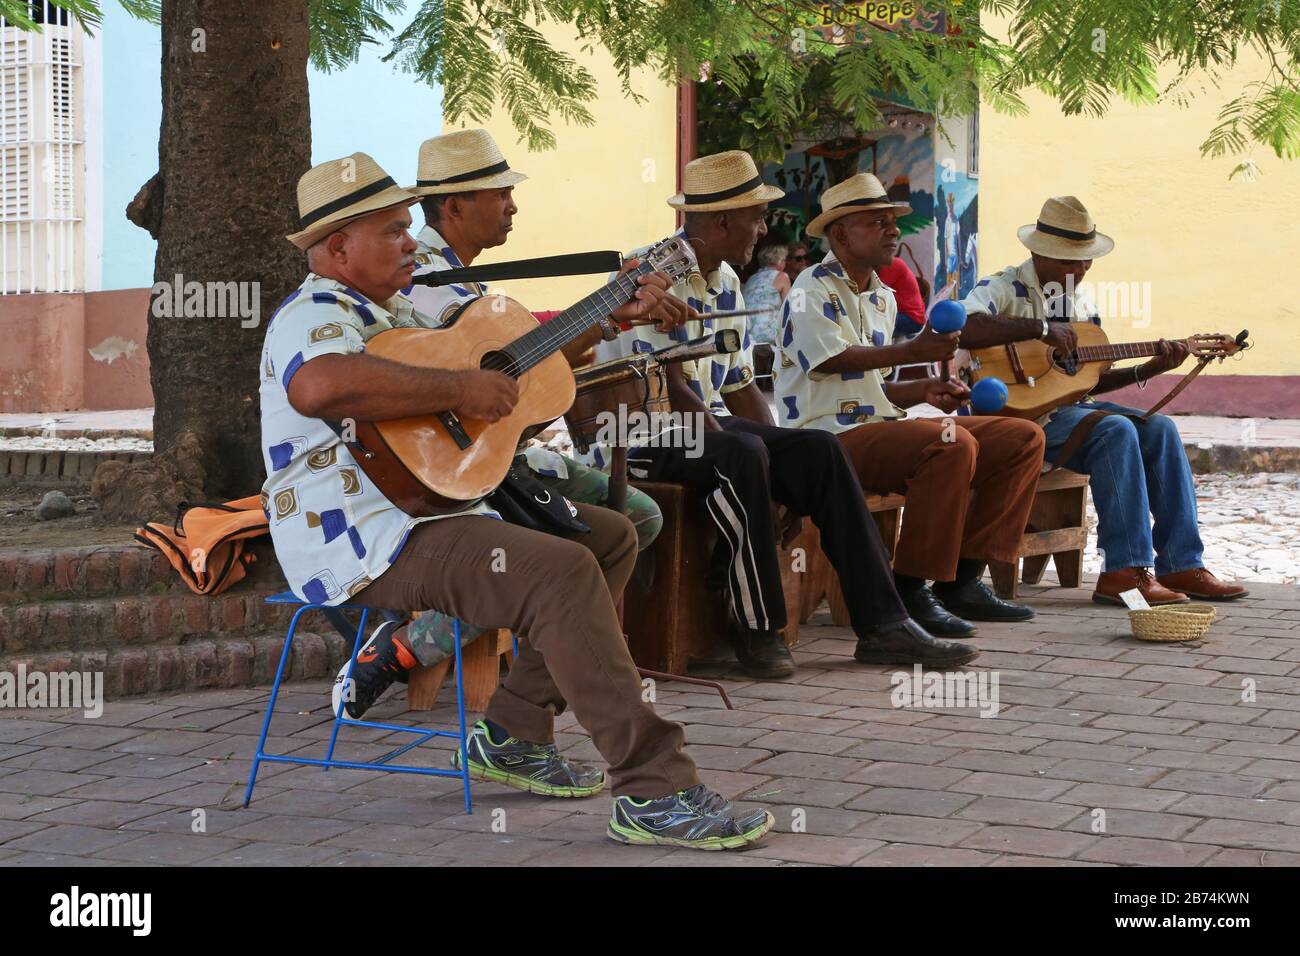 Band of cuban musicians in Trinidad Stock Photo